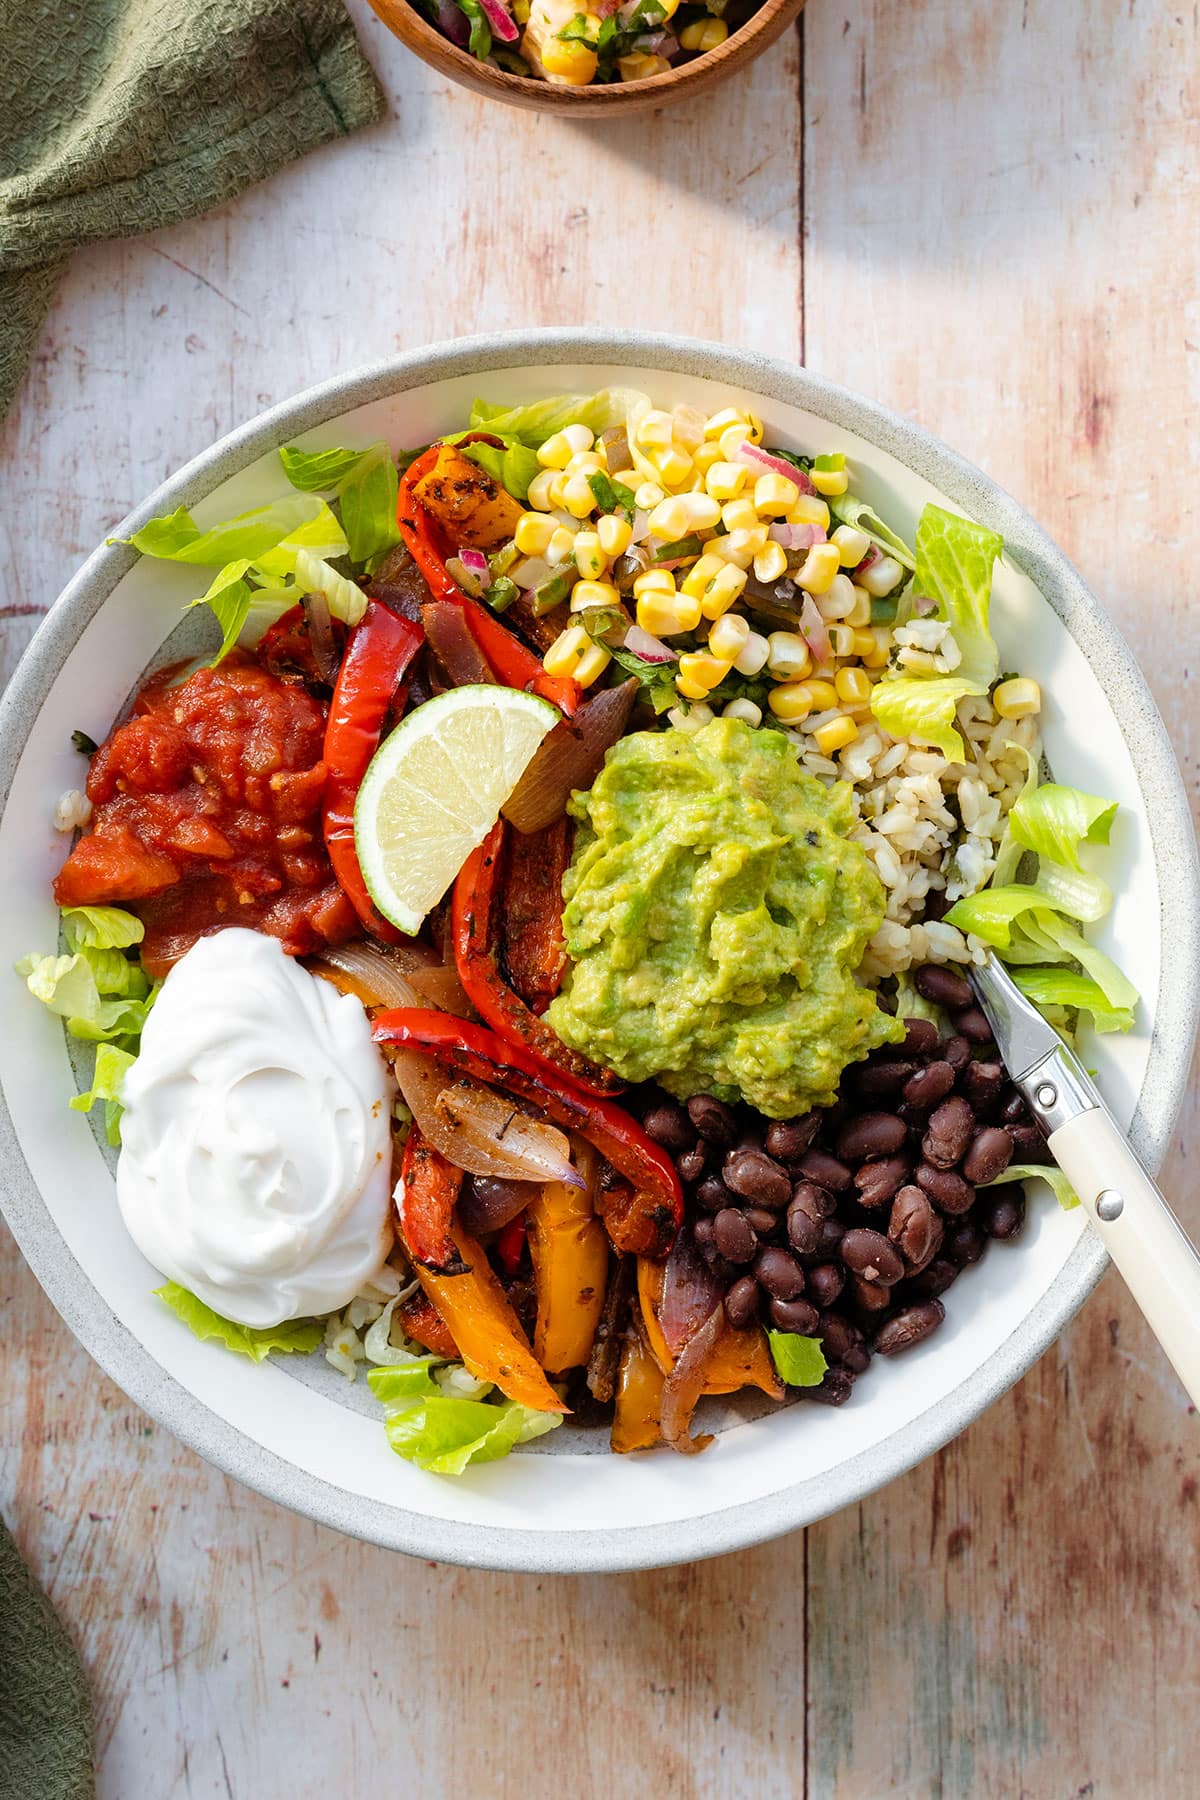 A photo of veggie burrito bowl in a grey bowl with a white rim on a light wooden background with a green kitchen towel on the left. In the bowl there is brown rice, corn salsa, tomato salsa, sour cream, guacamole, black beans, and roasted peppers.